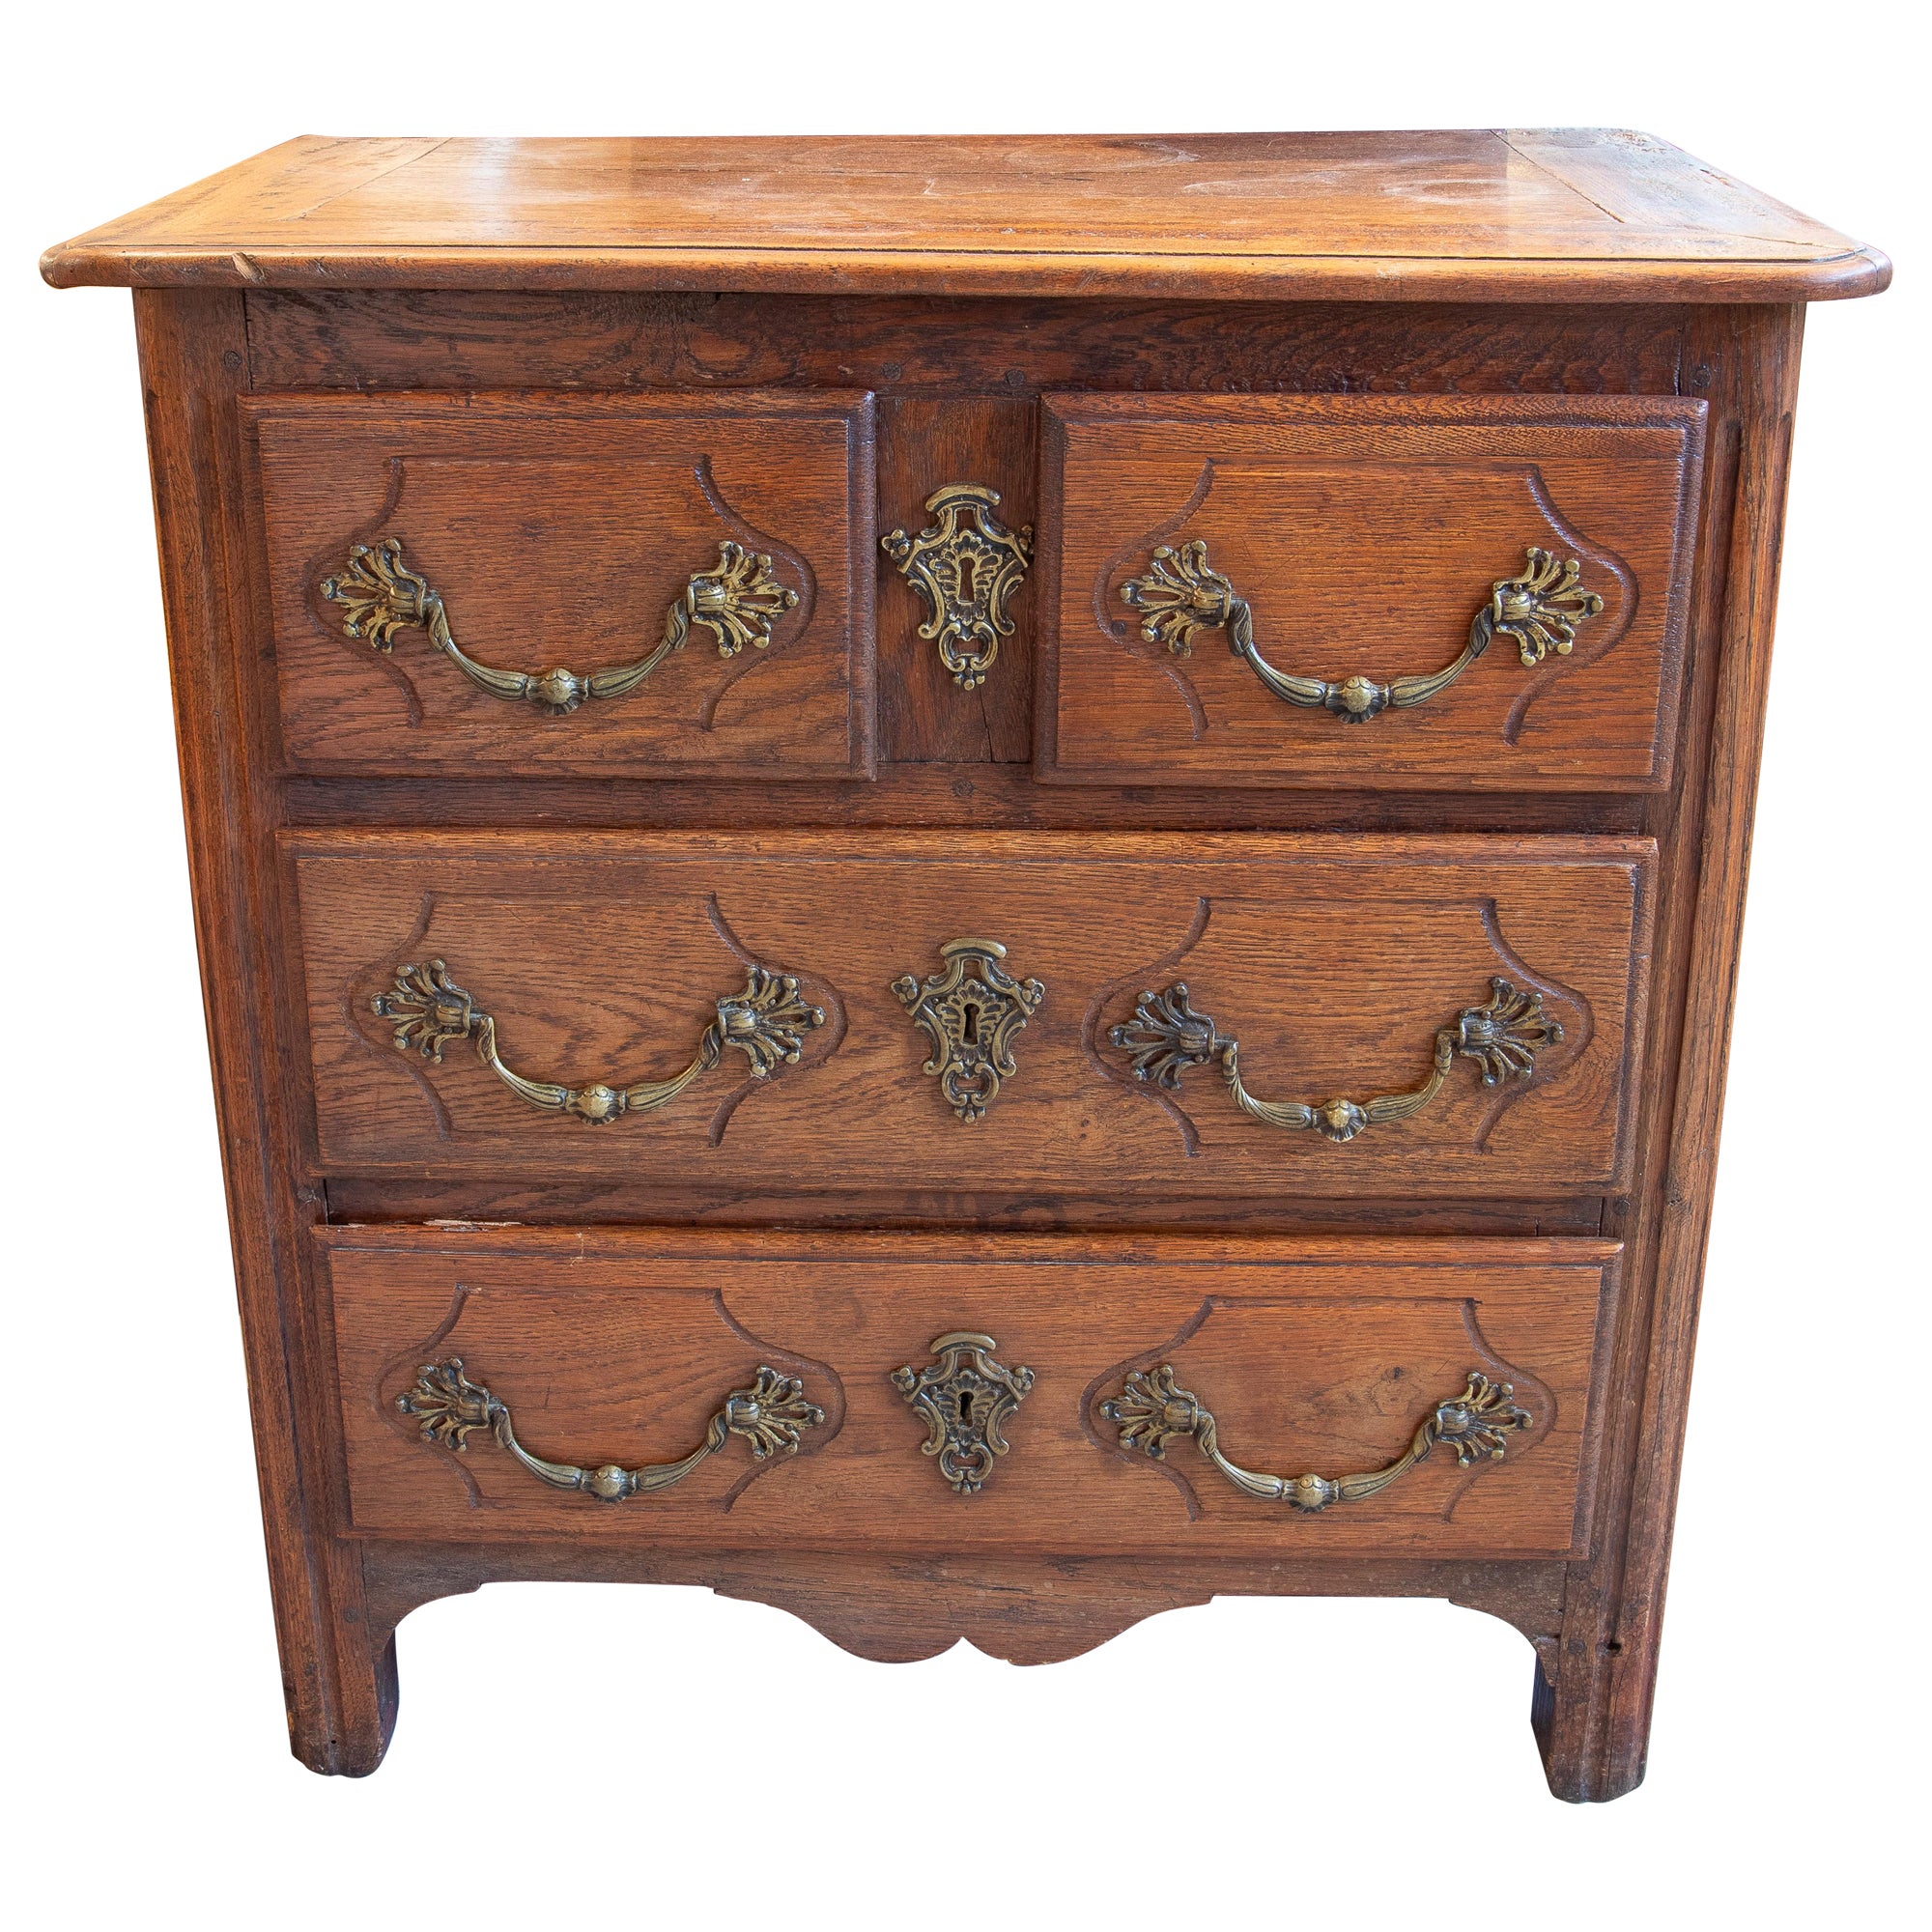 19th Century English Wooden Chest of Drawers with Three Drawers and Iron Fitting For Sale